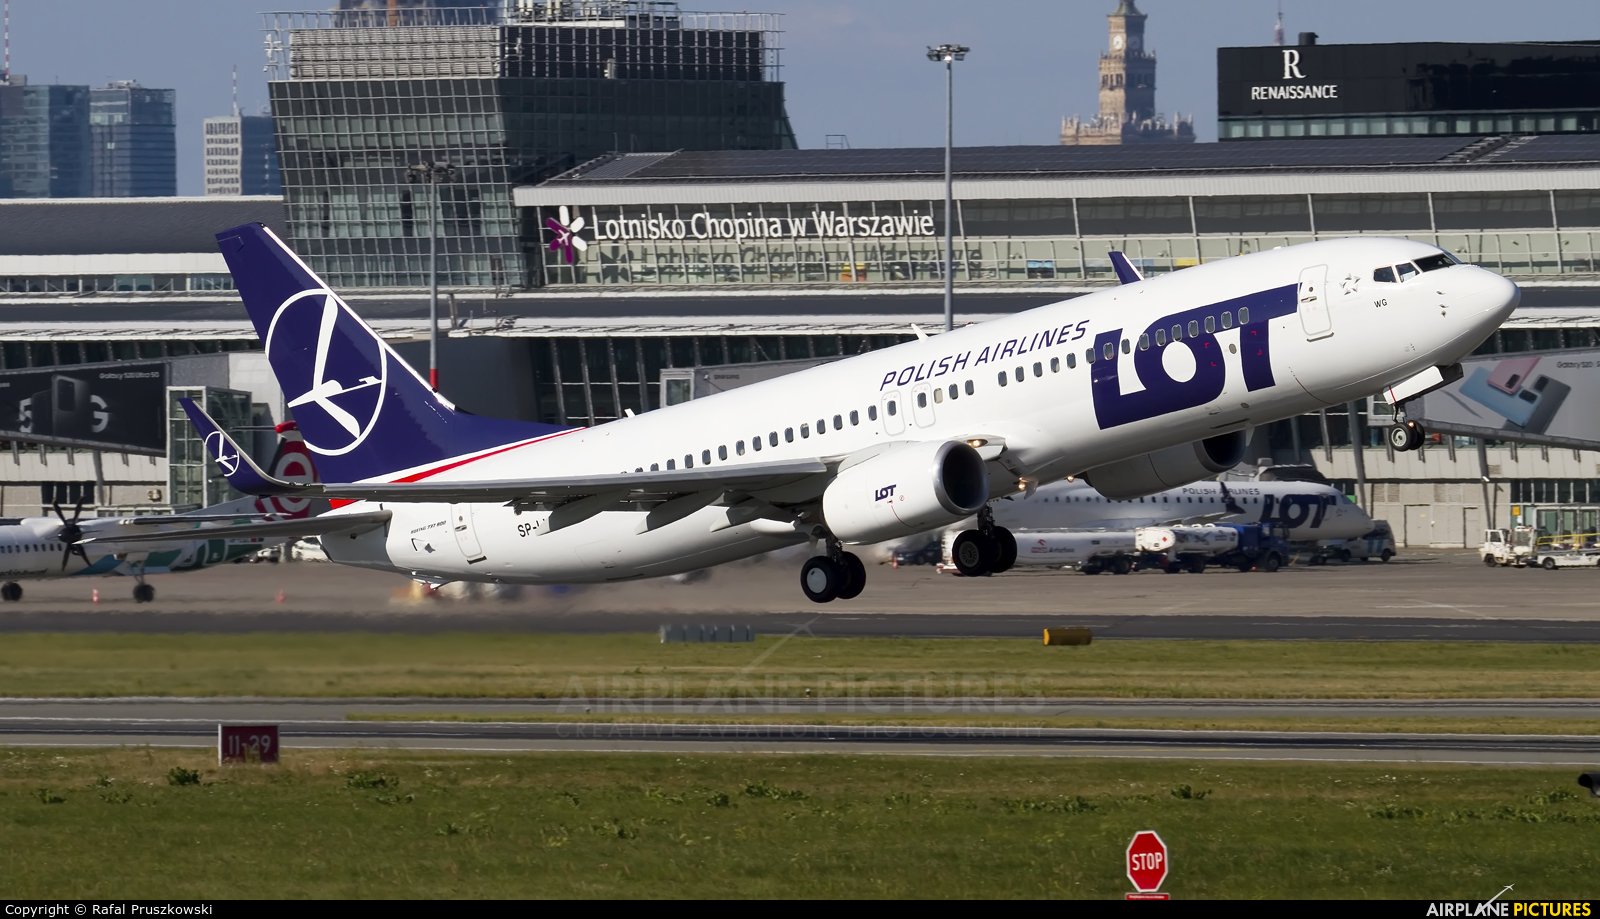 LOT - Polish Airlines SP-LWG aircraft at Warsaw - Frederic Chopin